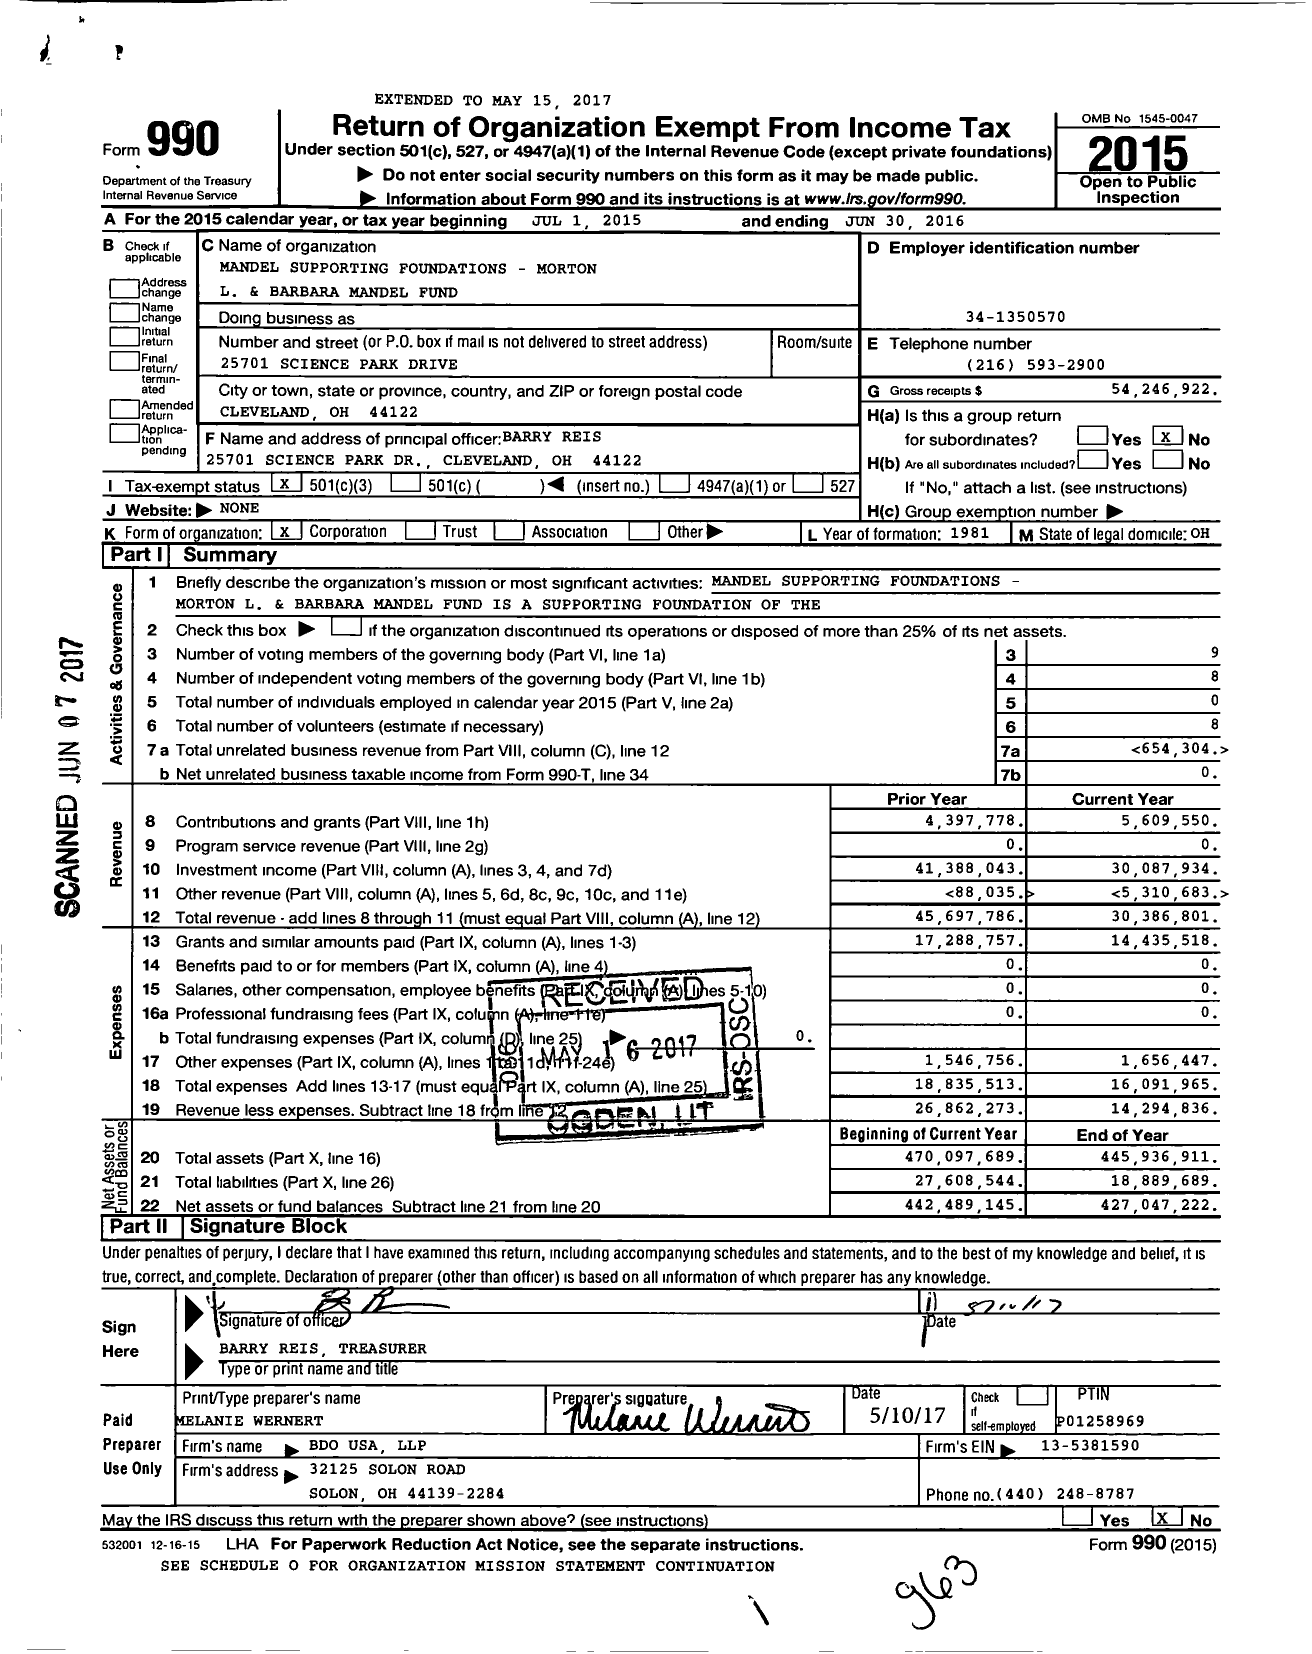 Image of first page of 2015 Form 990 for Mandel Supporting Foundations Morton L and Barbara Mandel Fund